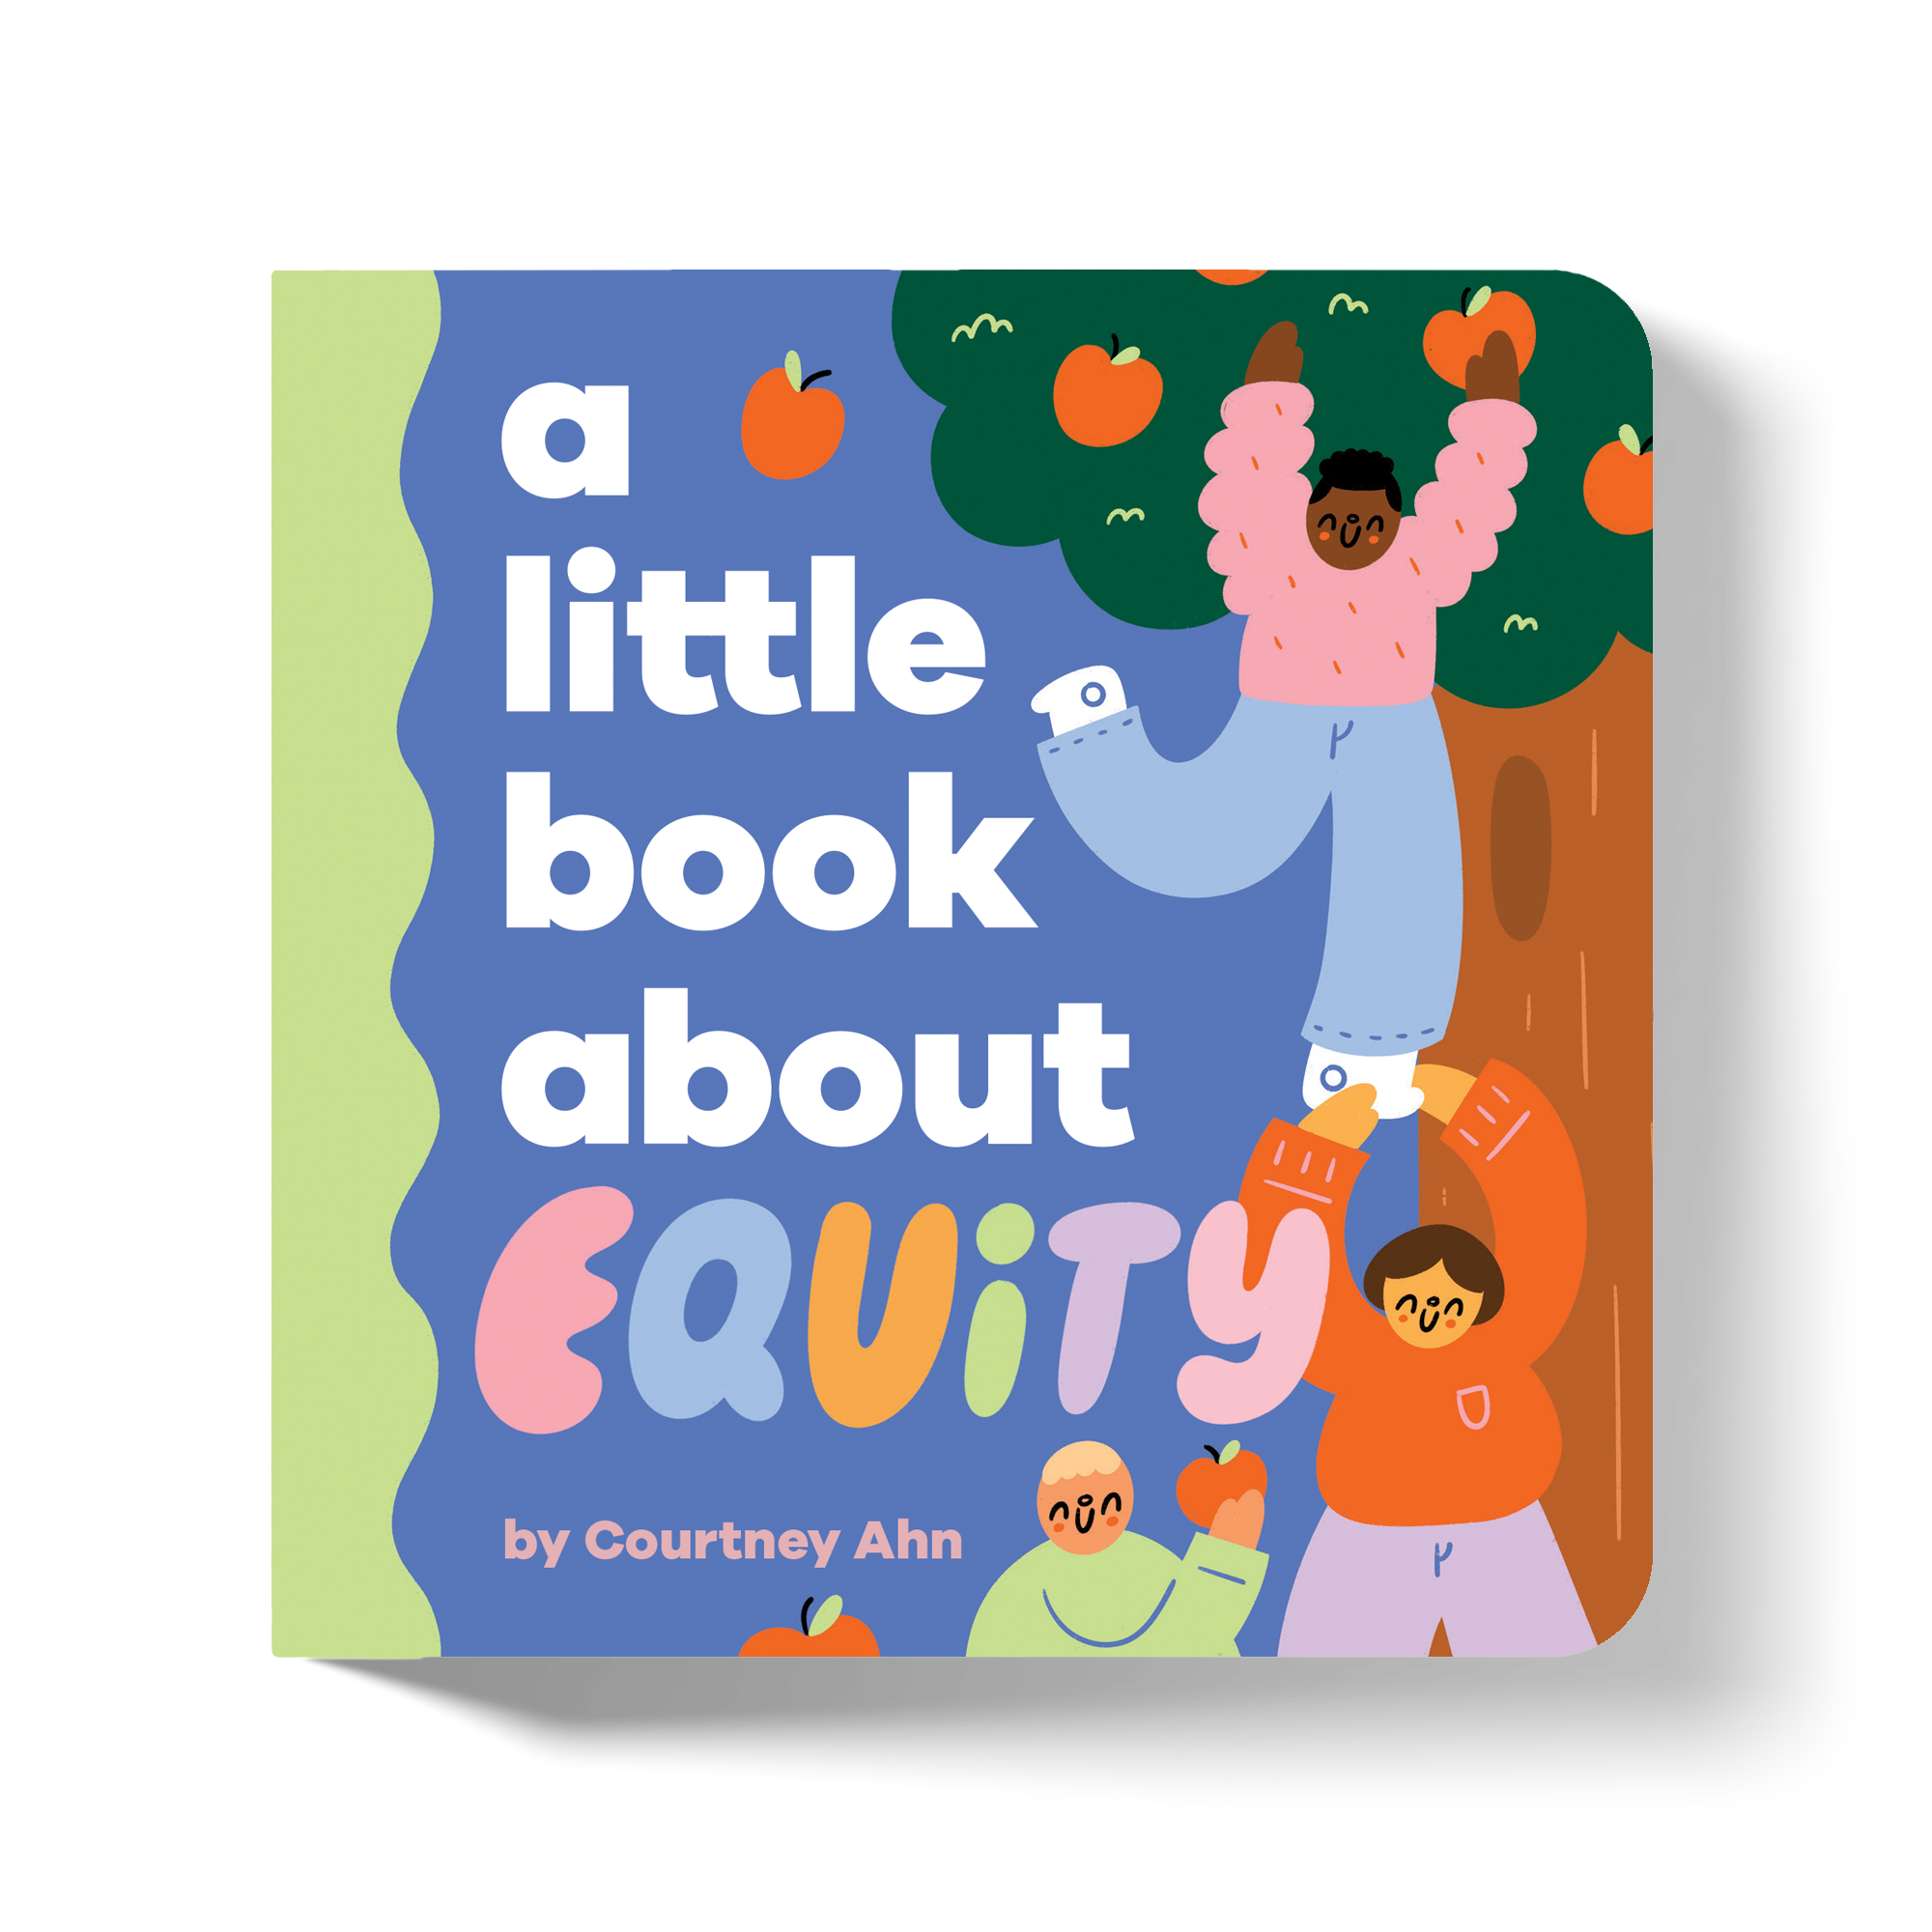 A Little Book About Equity